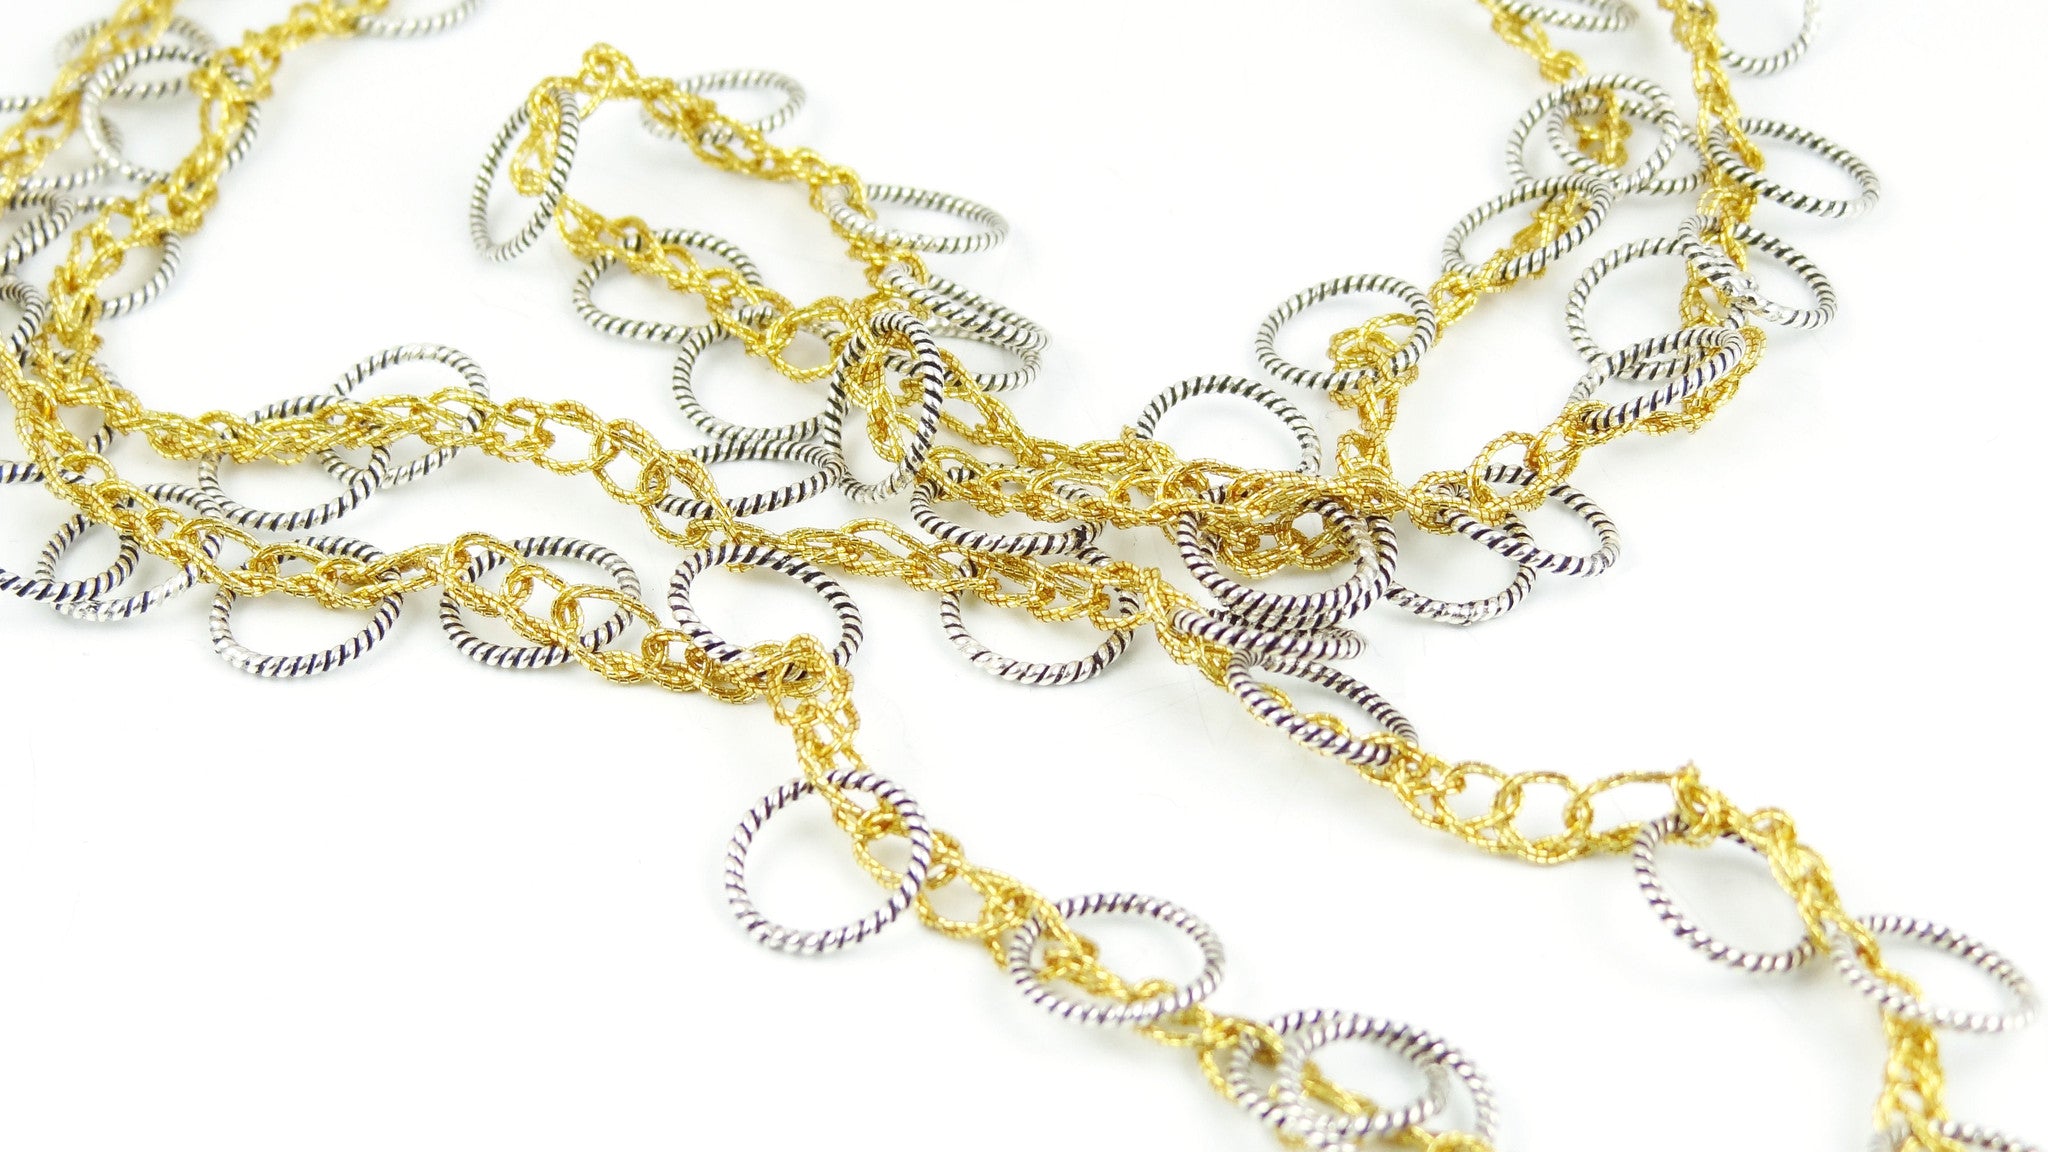 Mixed Metal Loopy Lariat Necklace